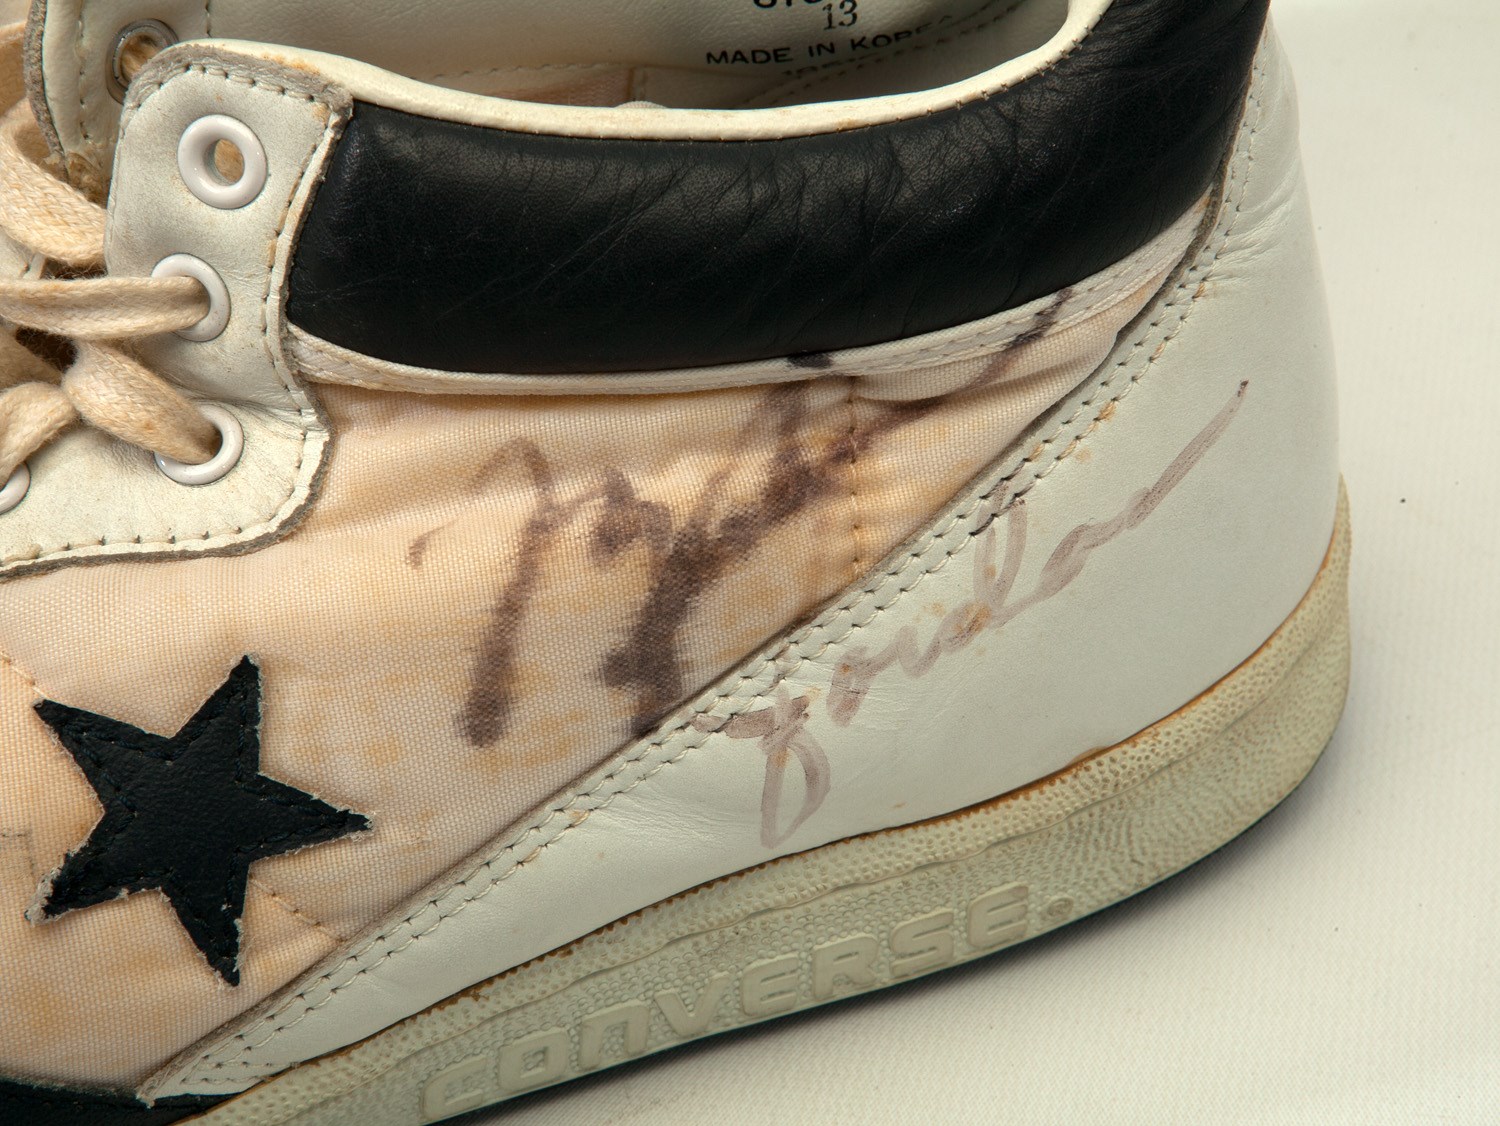 How Converse Tried (and Failed) to Get Michael Jordan's Game-Worn